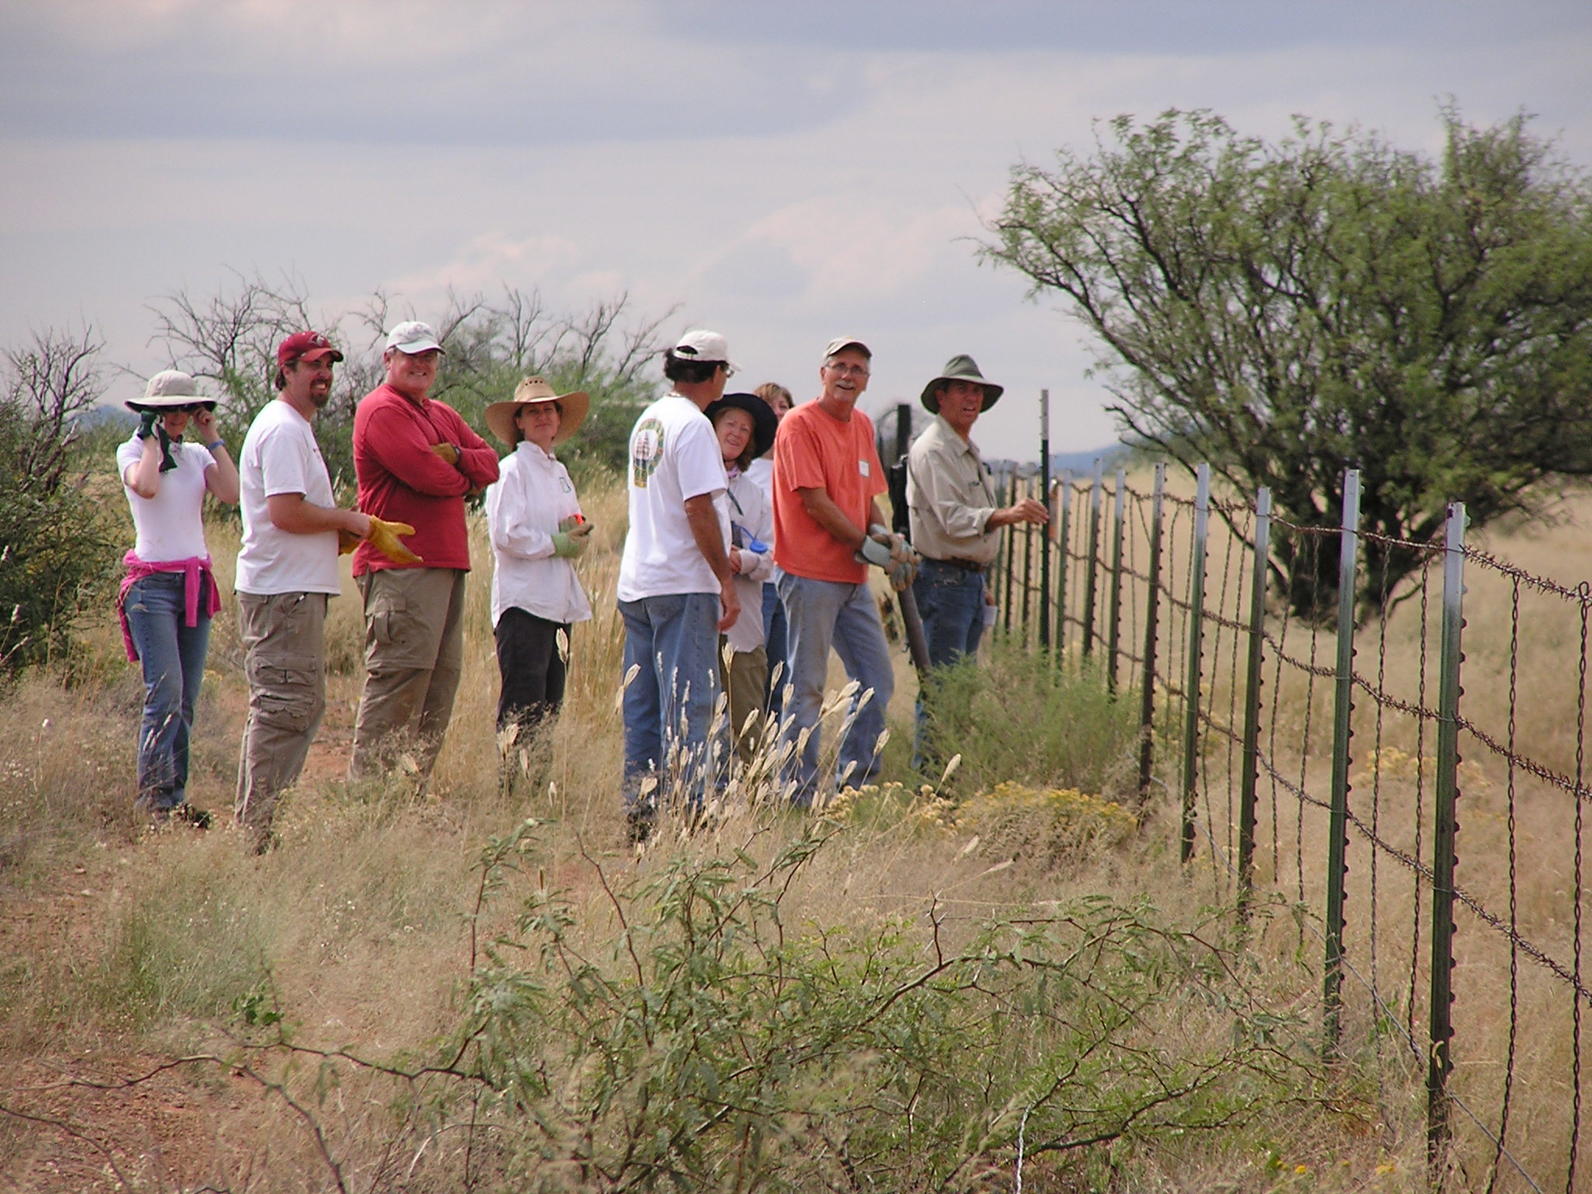 Volunteers stand alongisde a wire fence within a vast expanse of grass and mesquite.